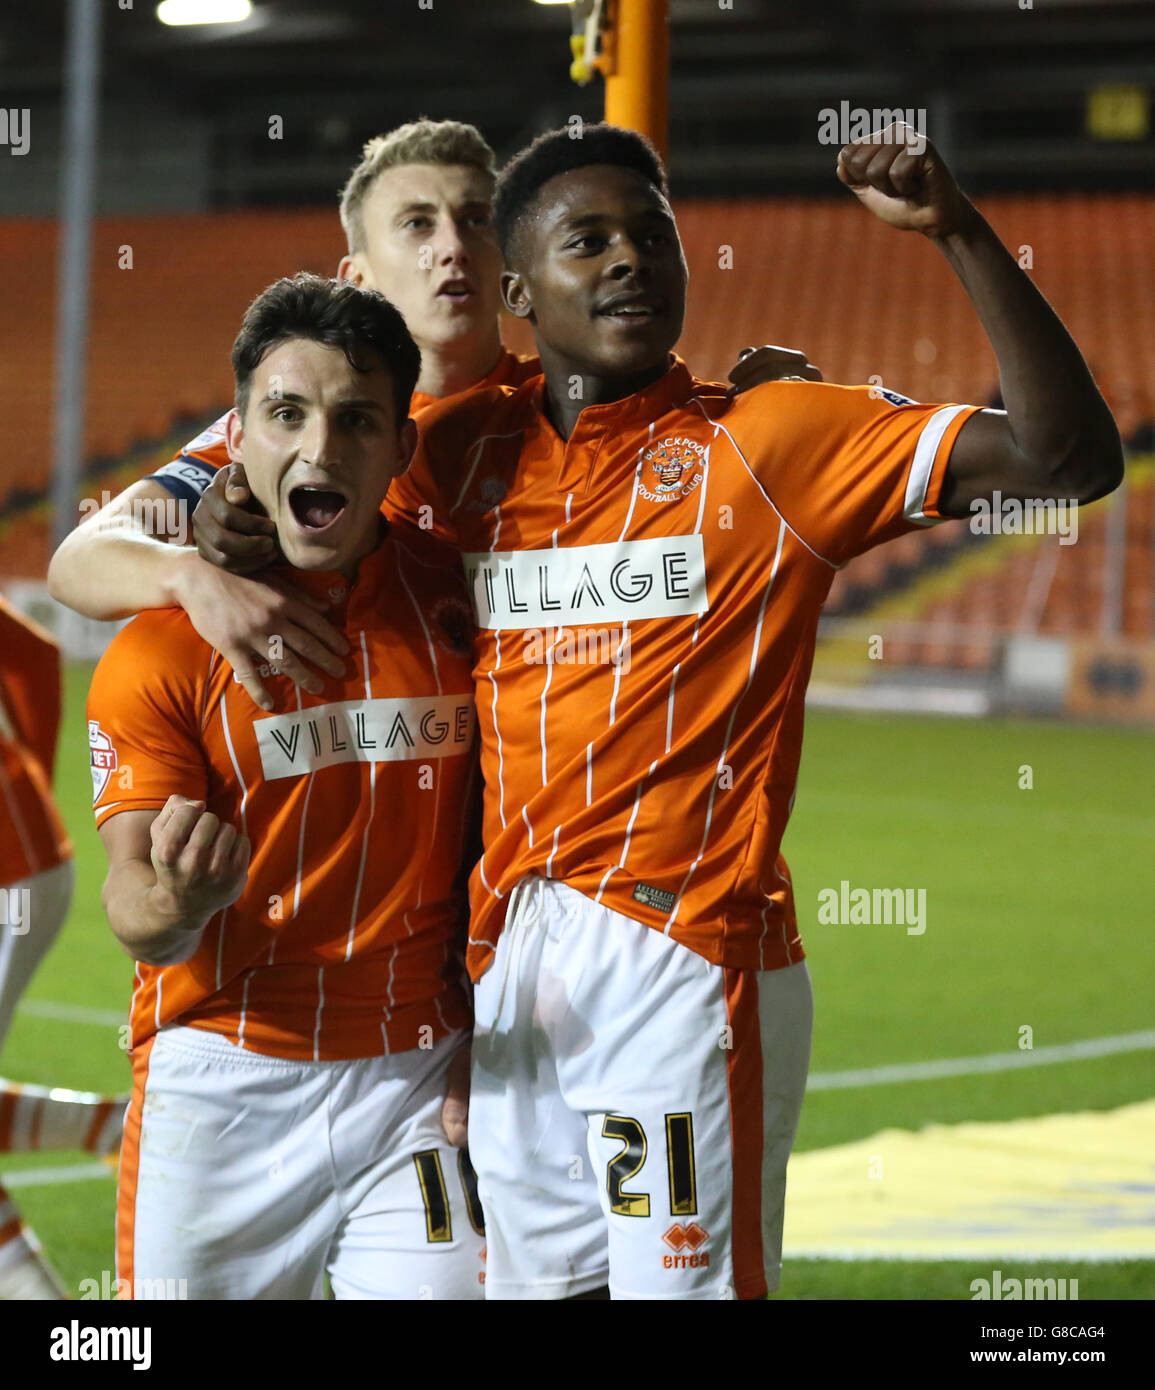 *ALTERNATE CROP* Blackpool's Jack Redshaw (left) celebrates scoring his side's first goal of the game Stock Photo